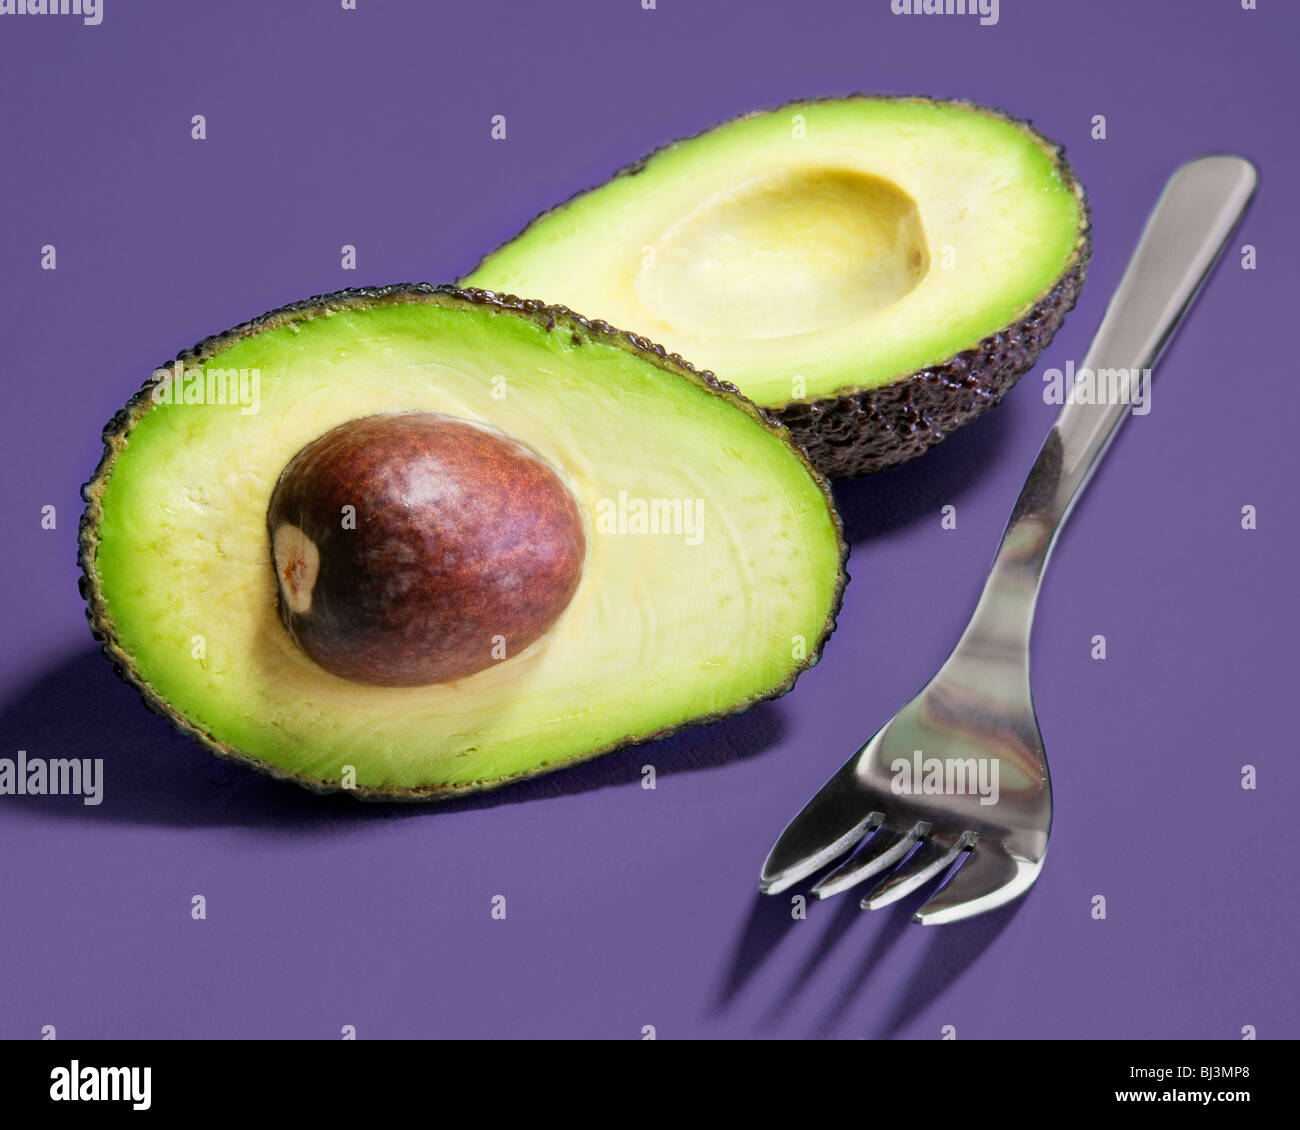 Hass variety avocado pear sliced into two halves along with a fork against a lilac background. Stock Photo